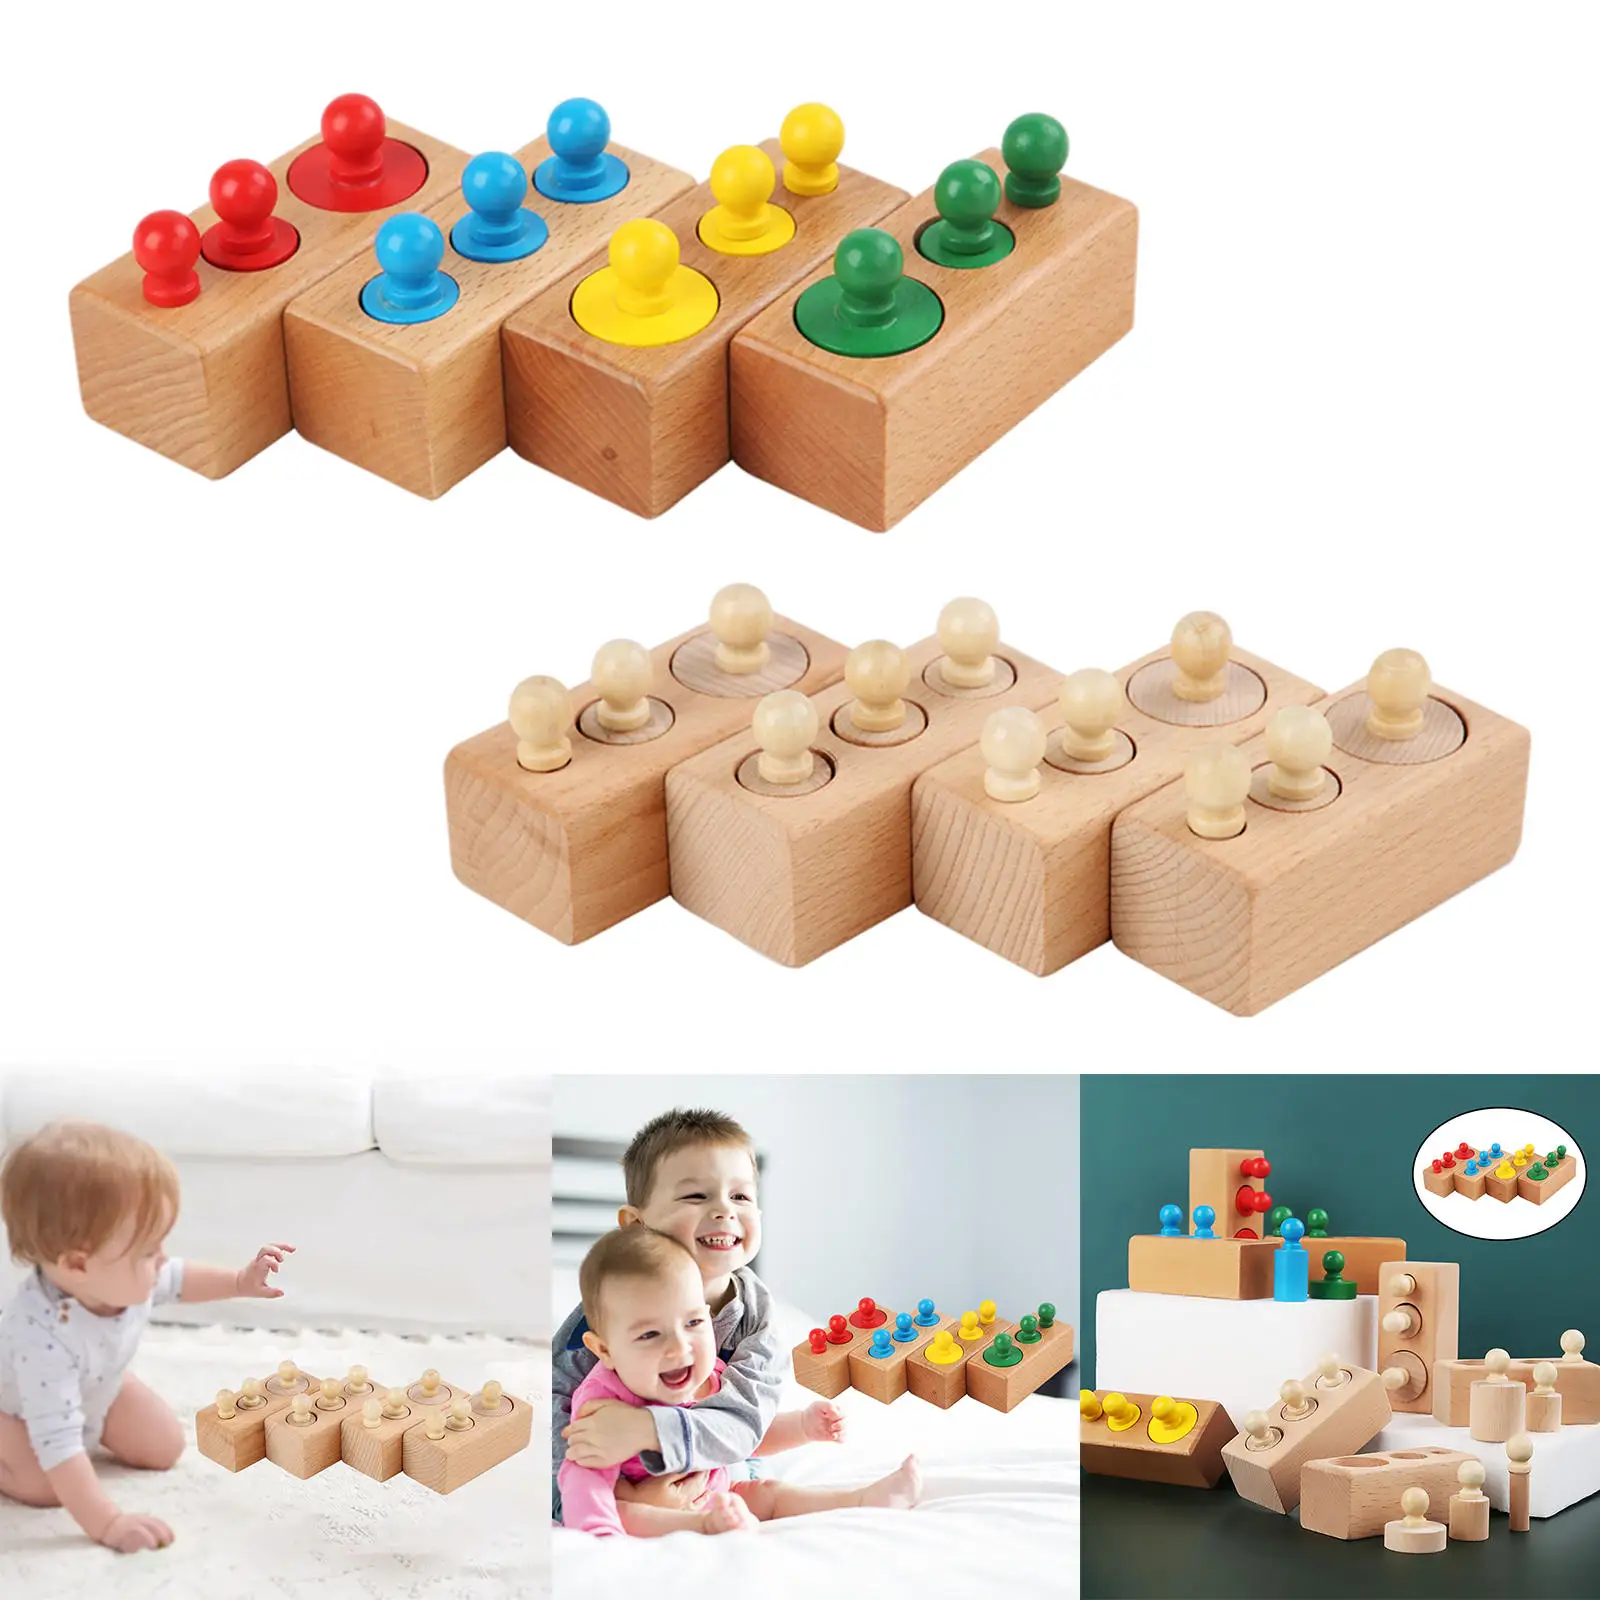 4Pcs Montessori Knobbed Cylinders Blocks Wooden Practice Board Game Early Educational Socket Toys for Home Kids Family